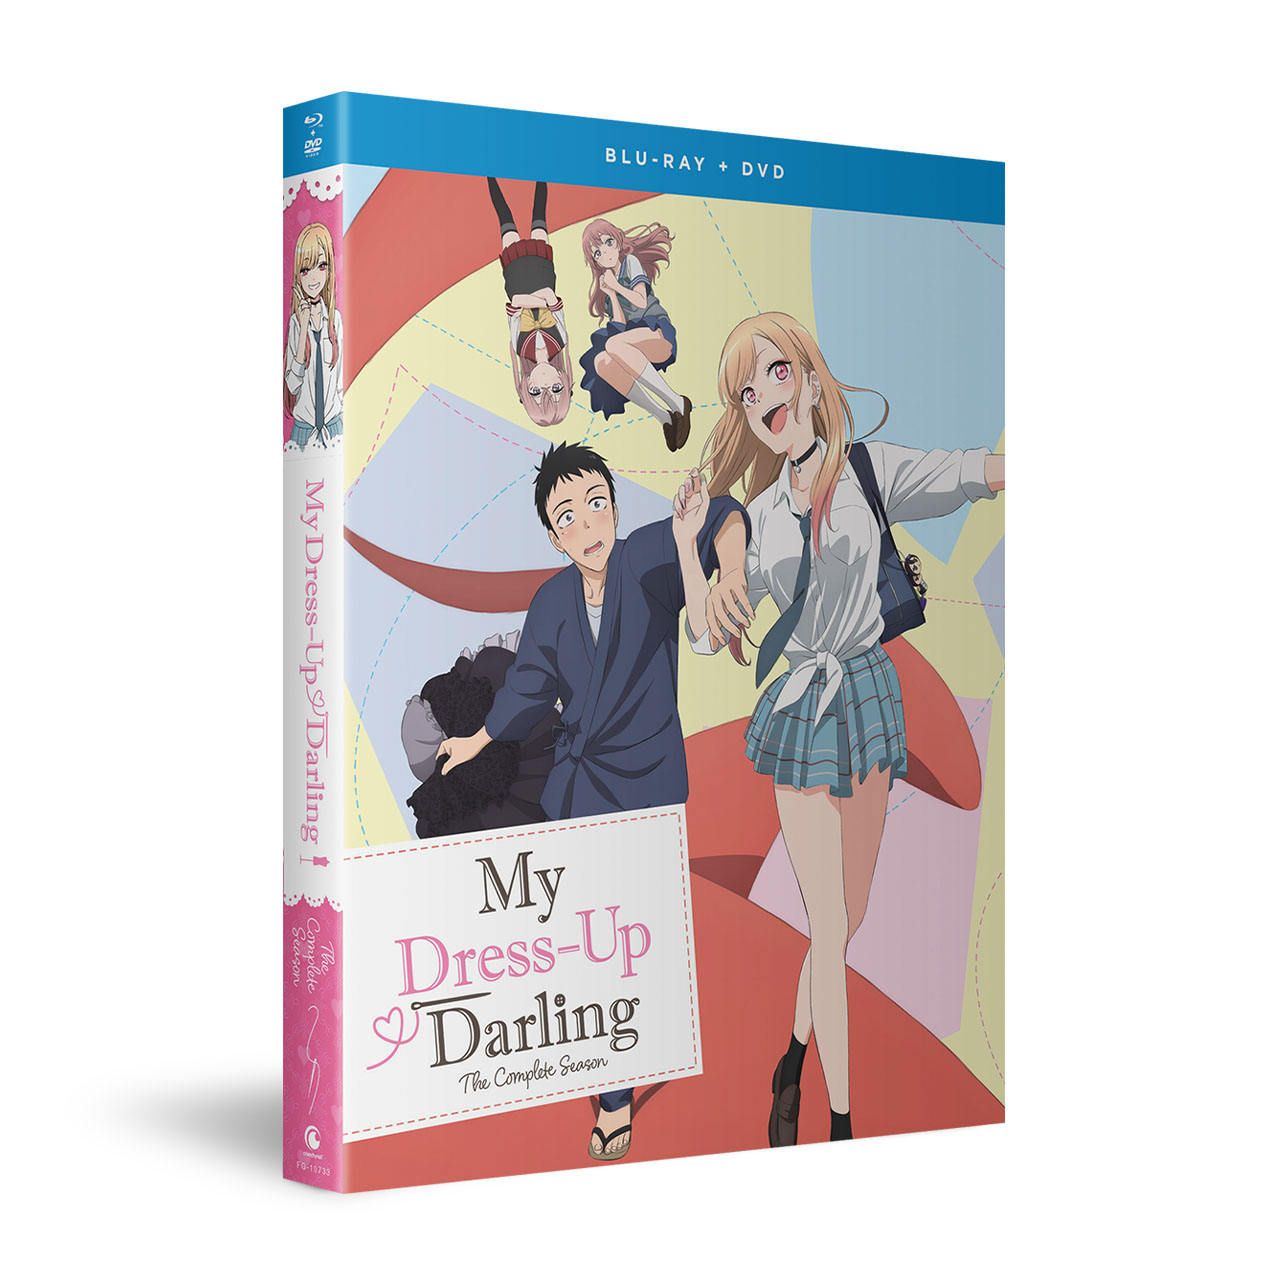 My Dress Up Darling - The Complete Season - Blu-ray + DVD image count 2